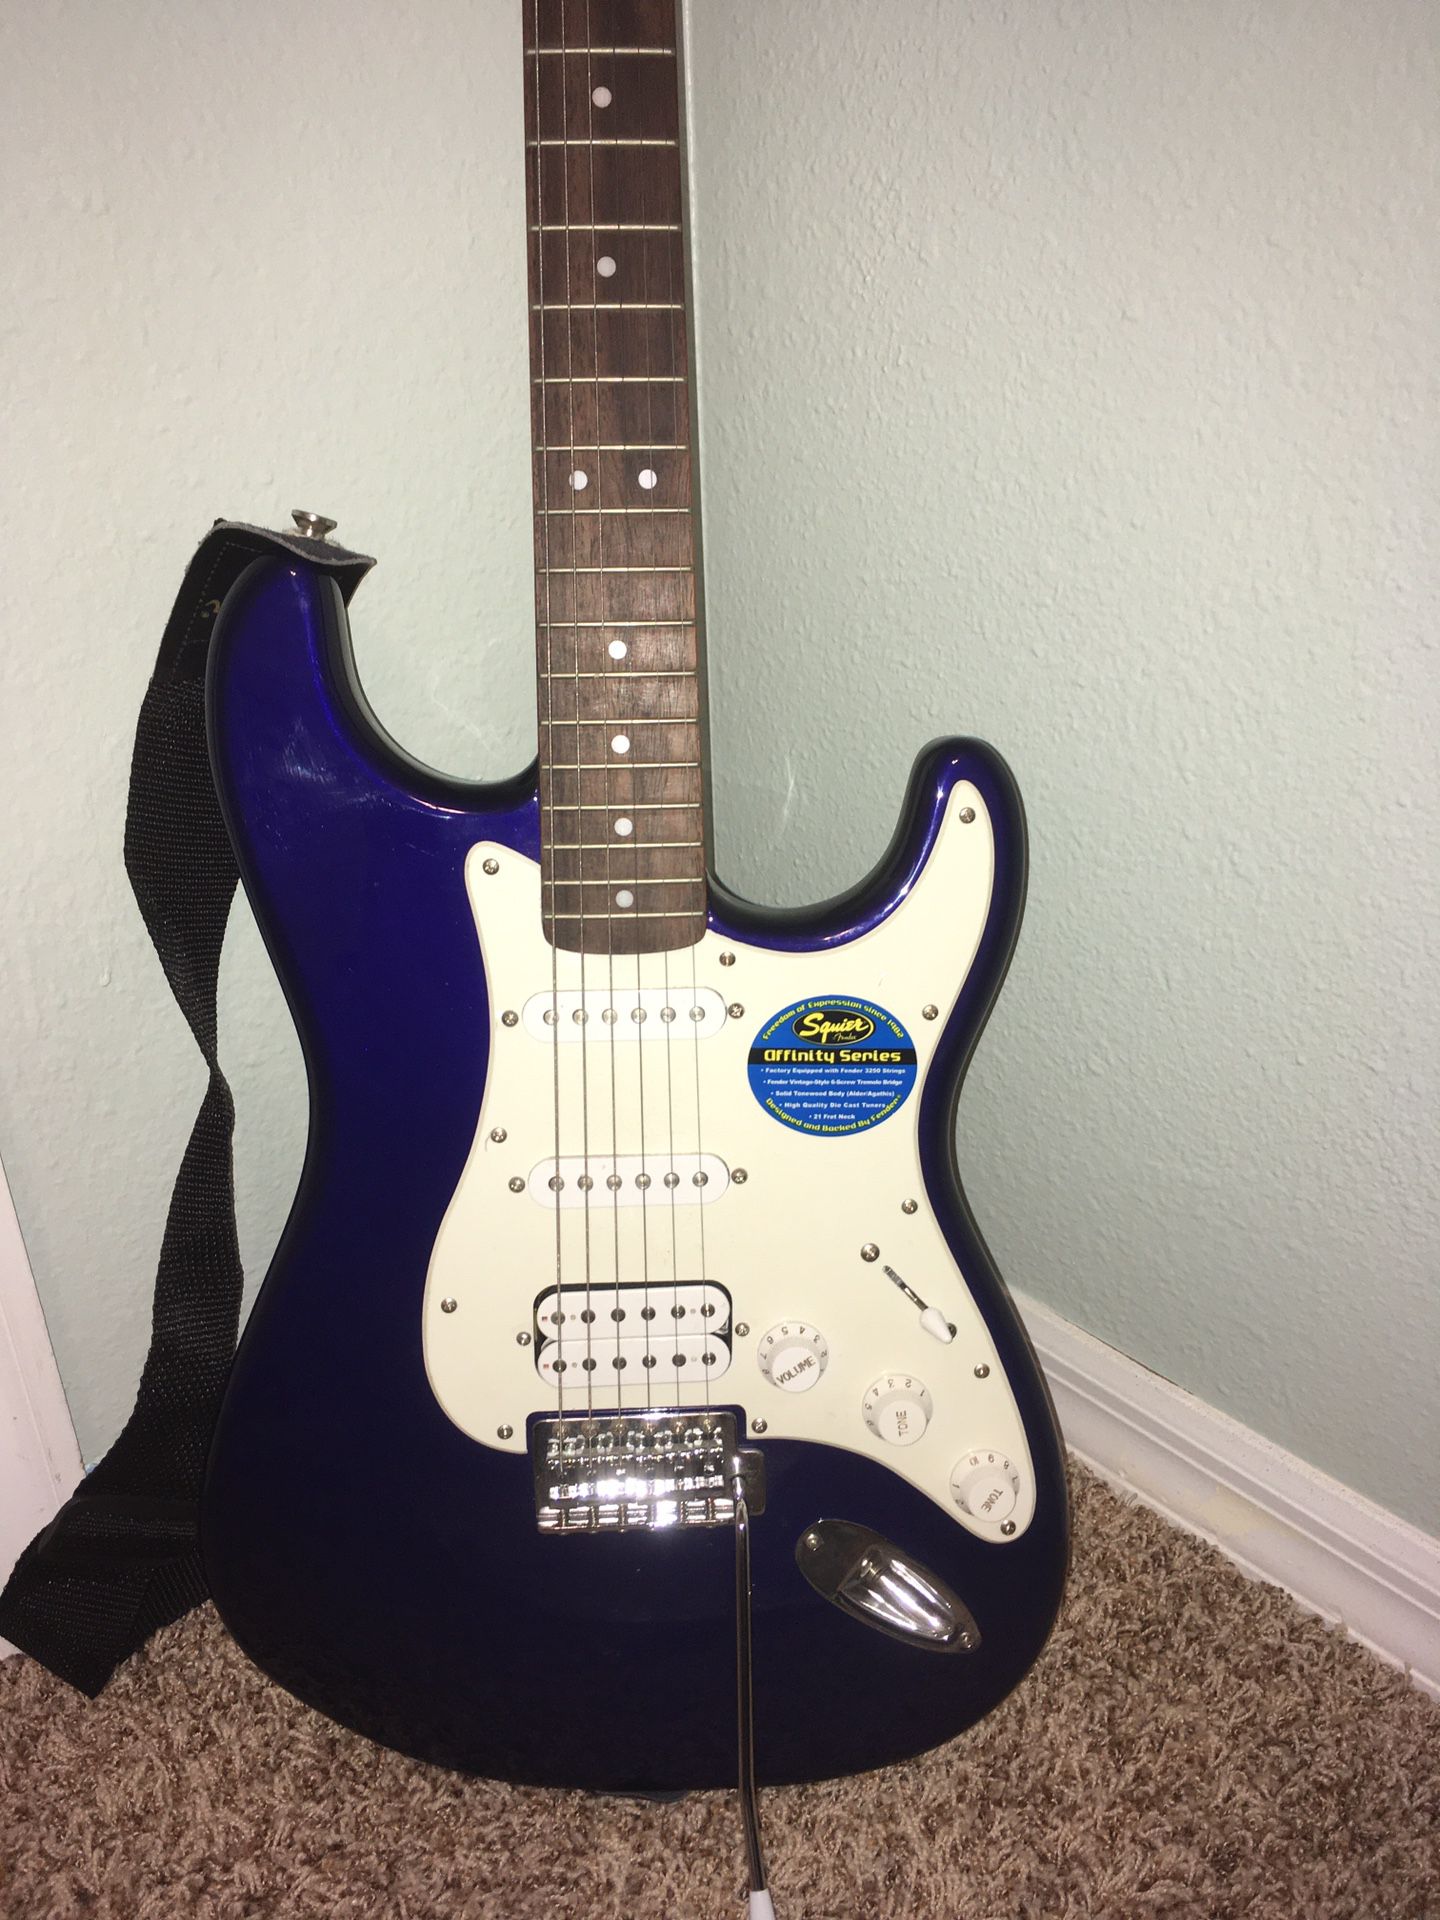 Fender Electric Guitar with amp, case and tuner